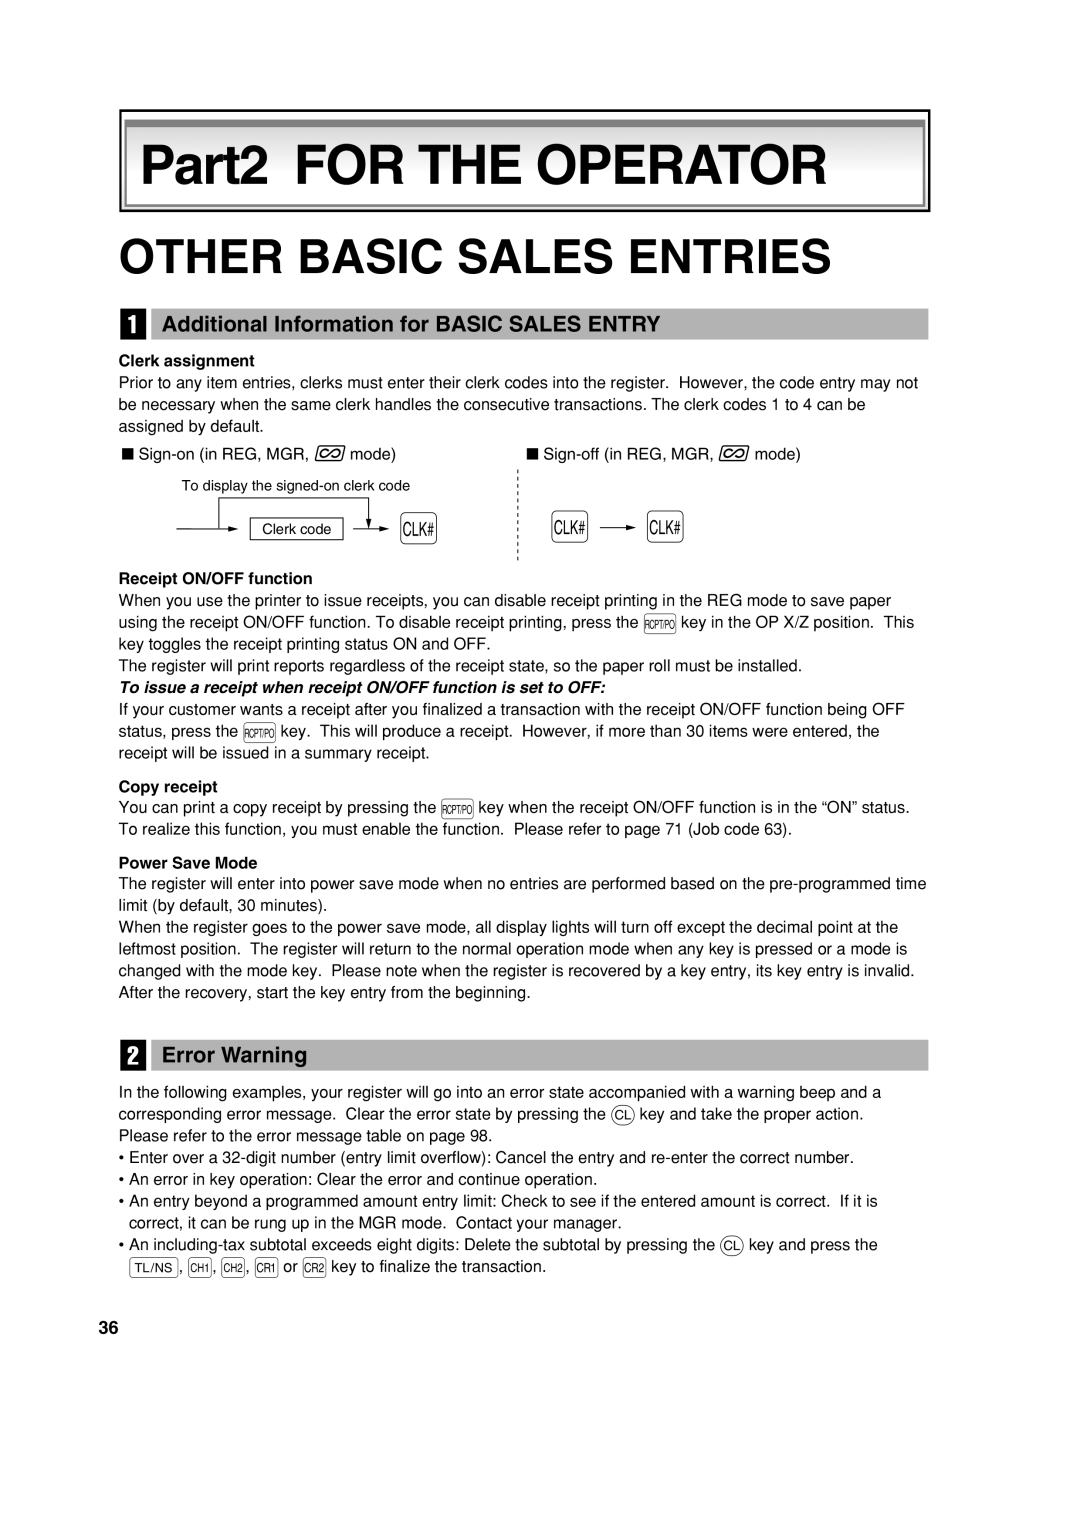 Sharp XE-A303 Part2 FOR THE OPERATOR, Other Basic Sales Entries, Additional Information for BASIC SALES ENTRY 